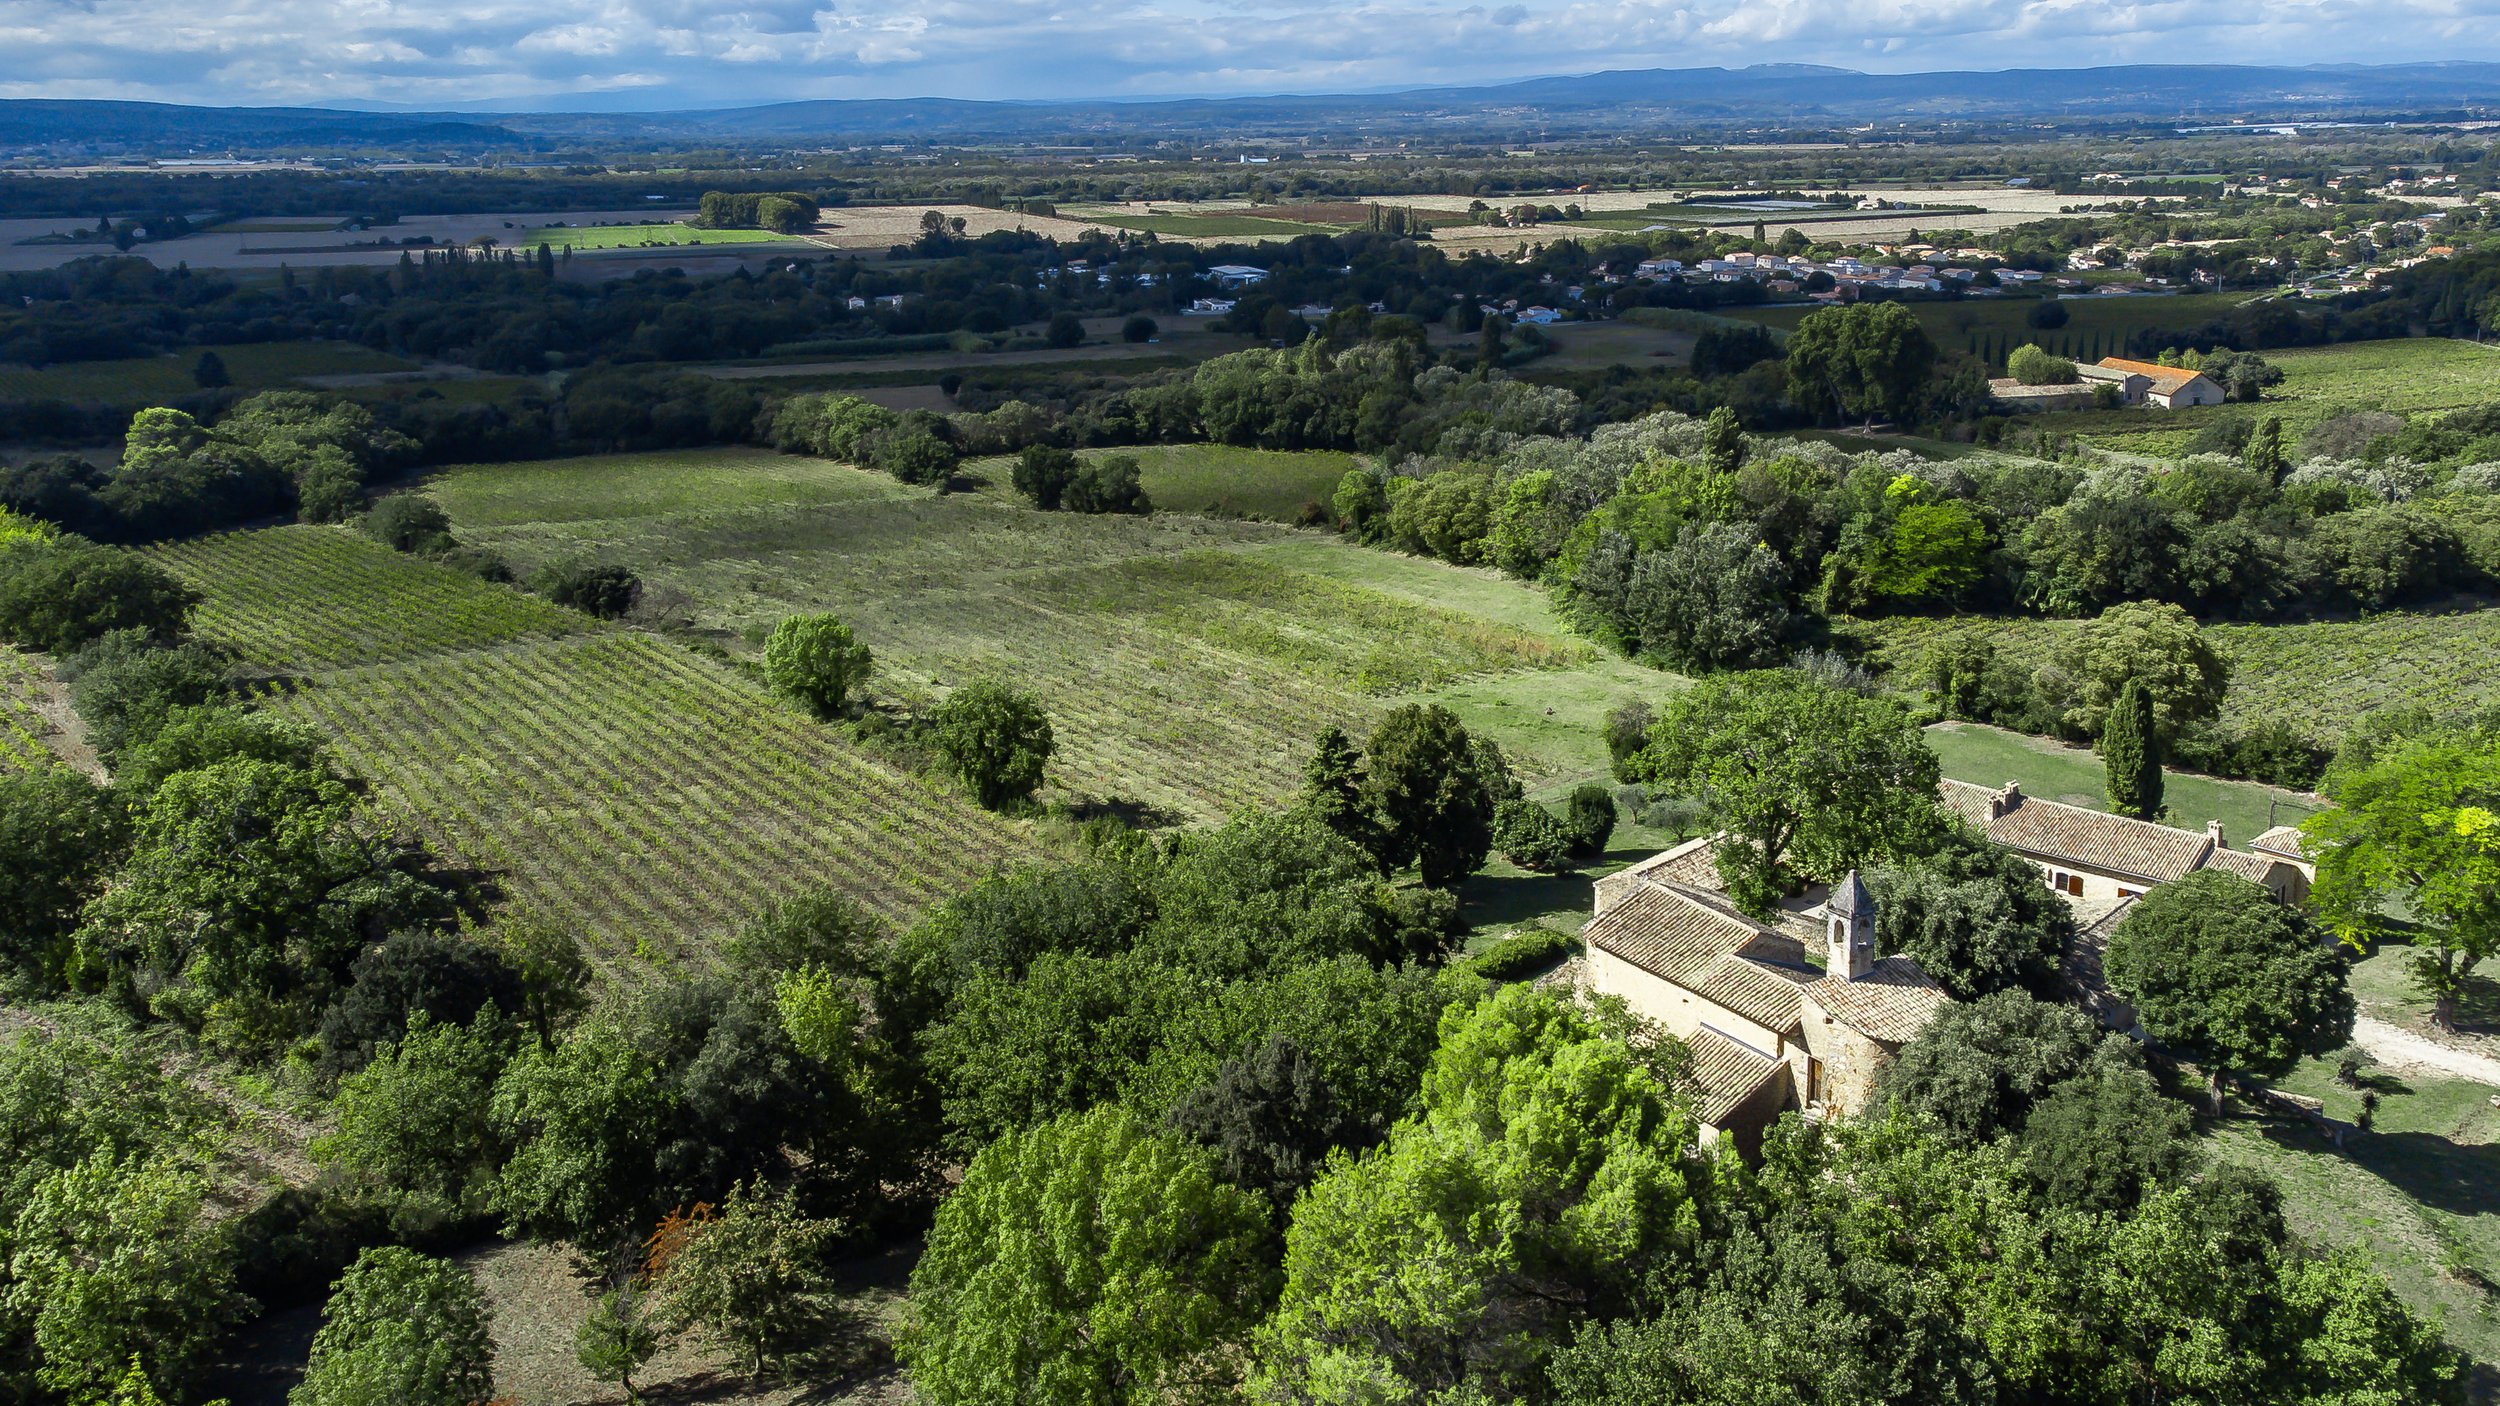 Francis+York+Renovated Historic Residence and 98 Acre Estate in Provence, France  00008.jpg